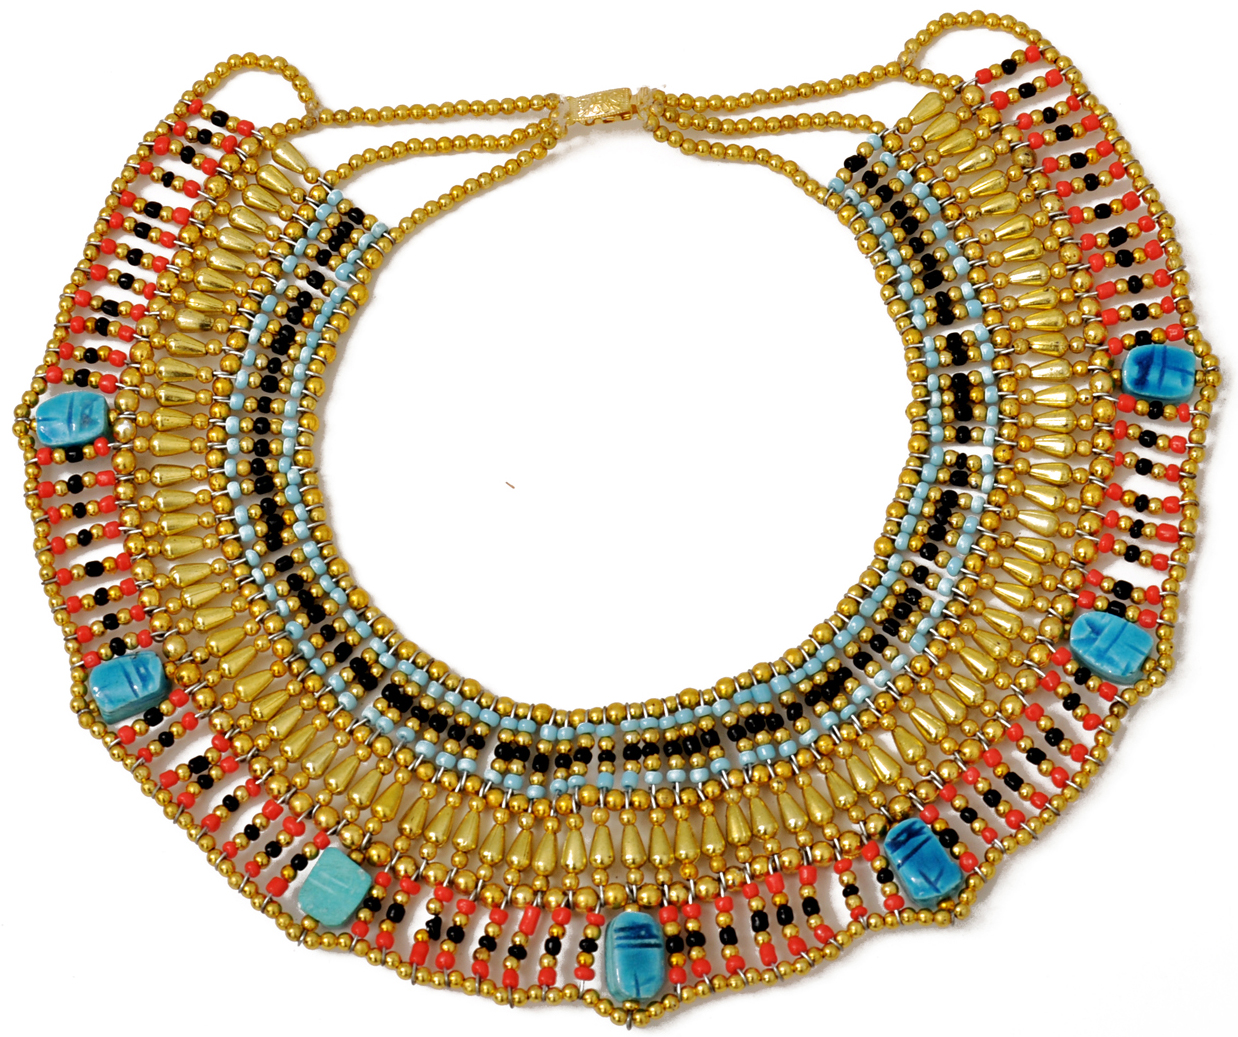 Cleopatra Necklace Collar ancient Egyptian queen costume jewelry